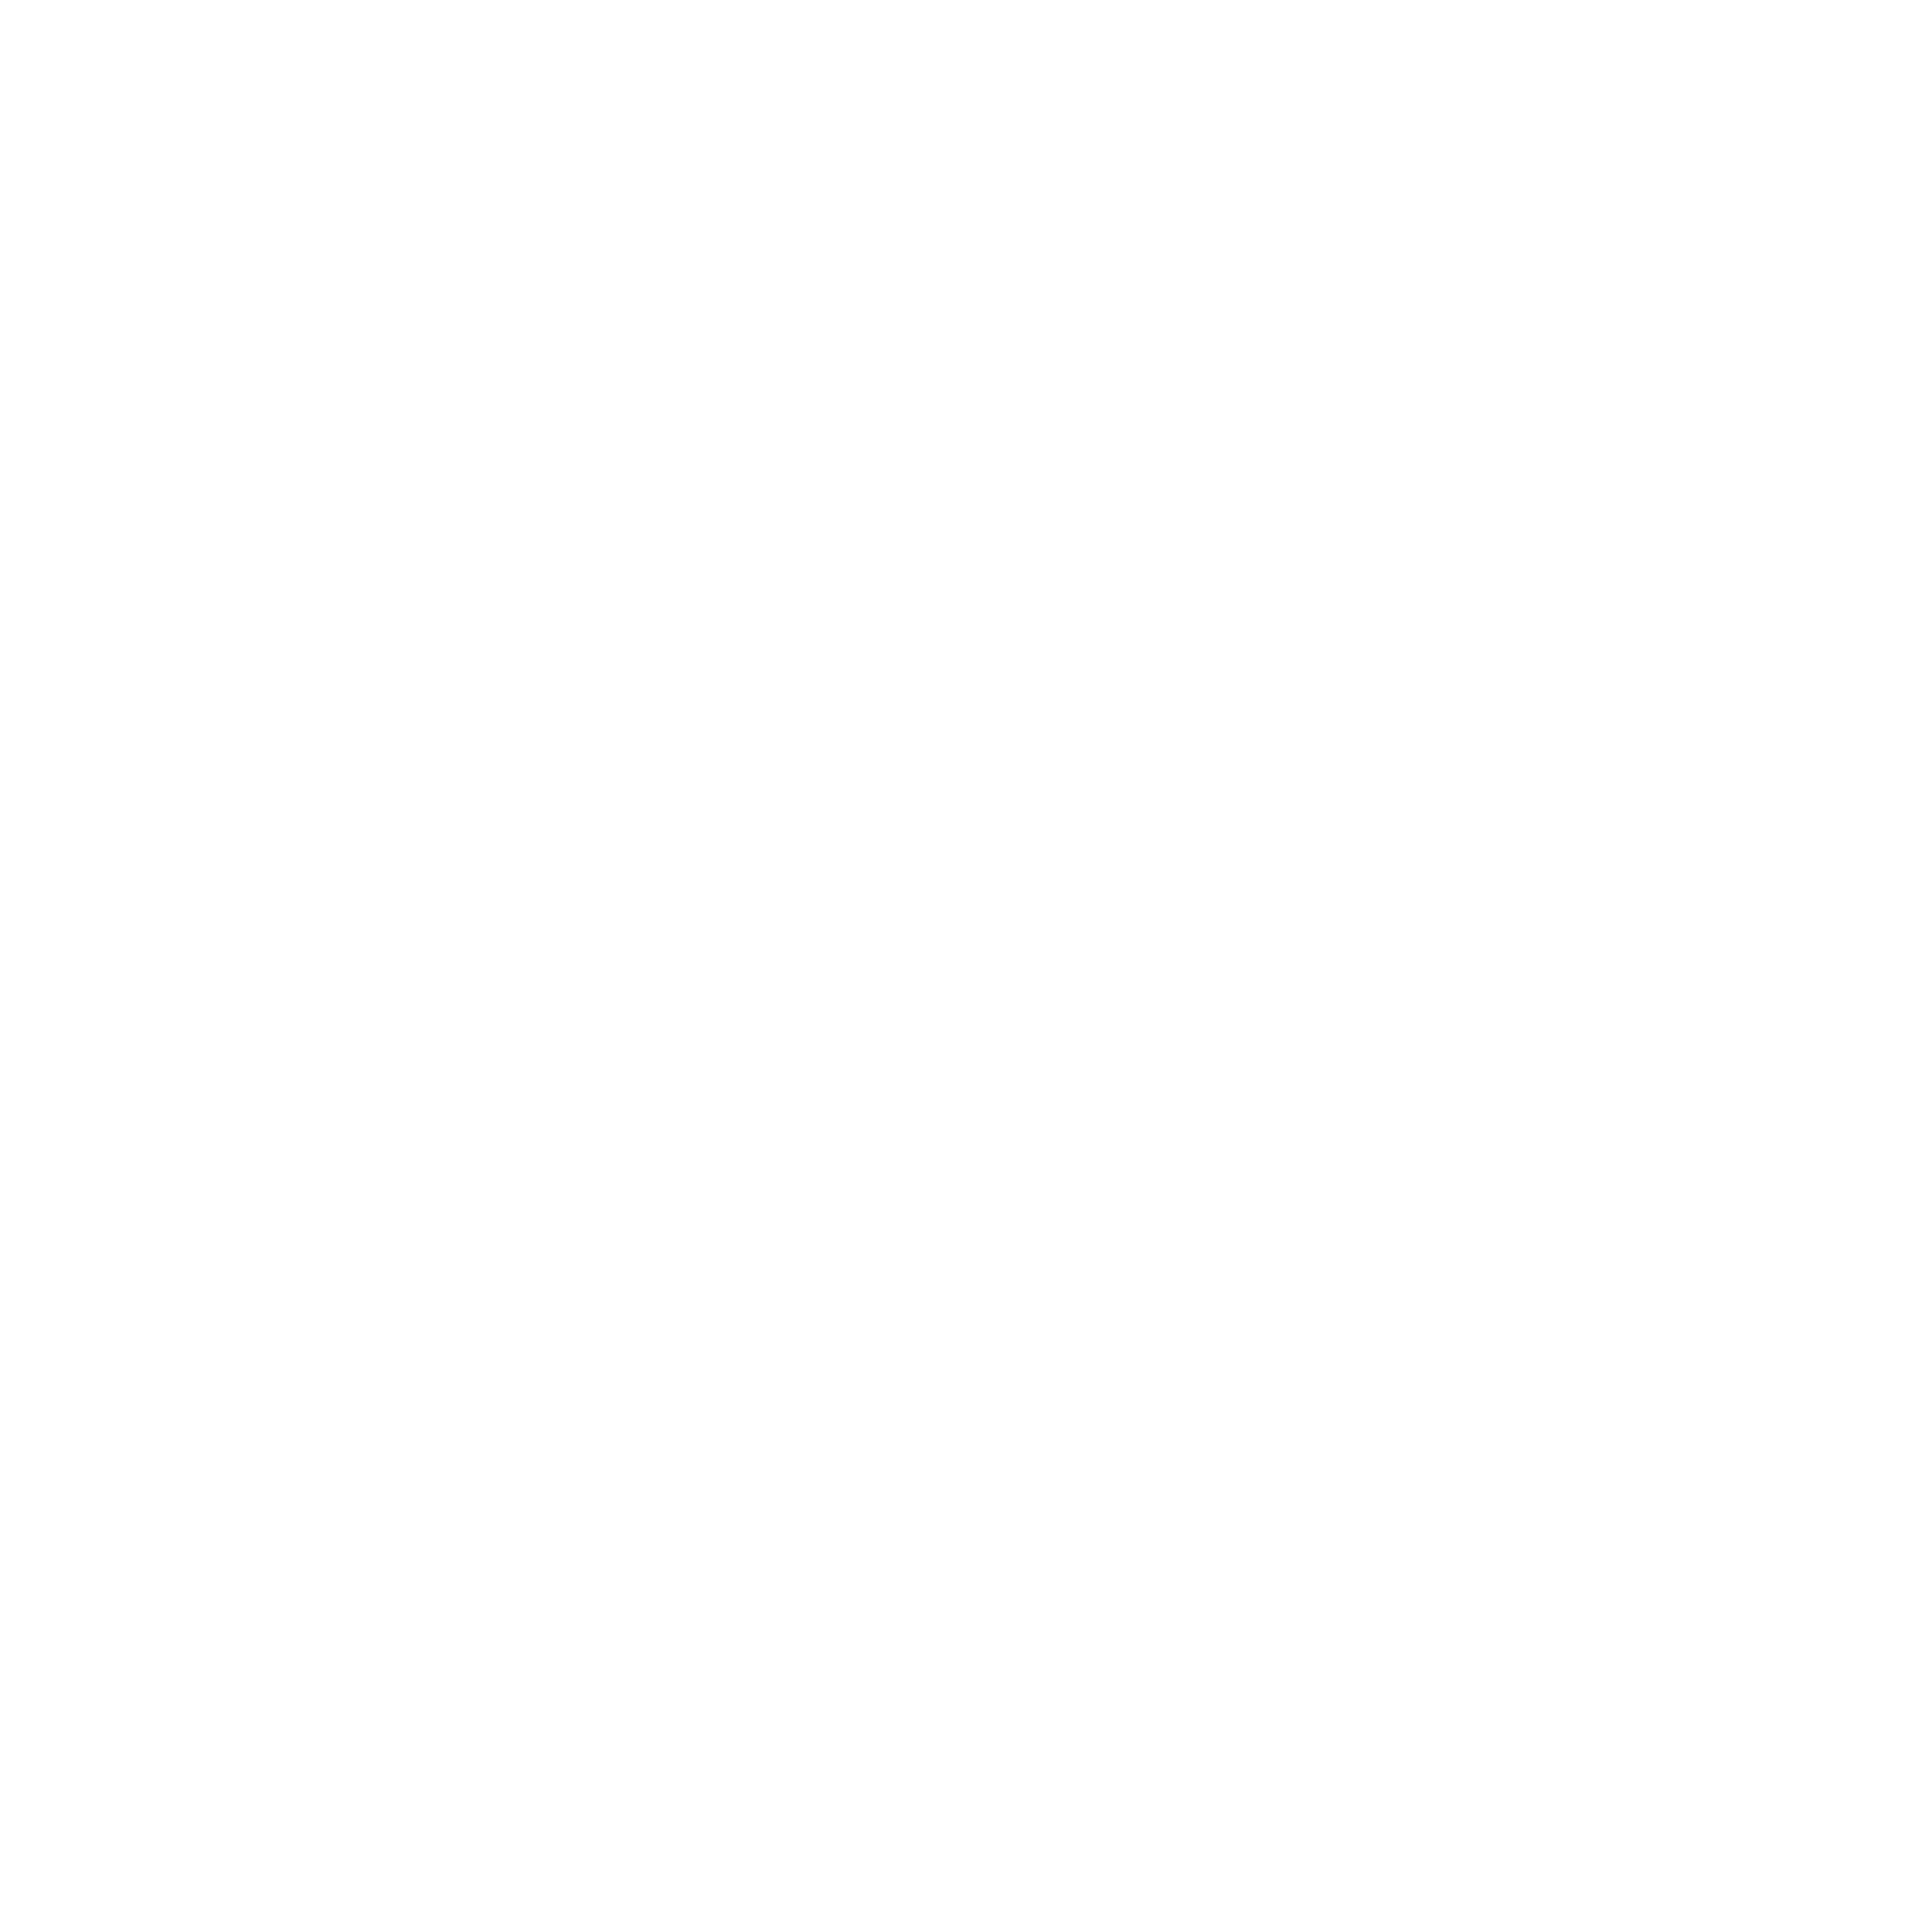 hand/paw icon